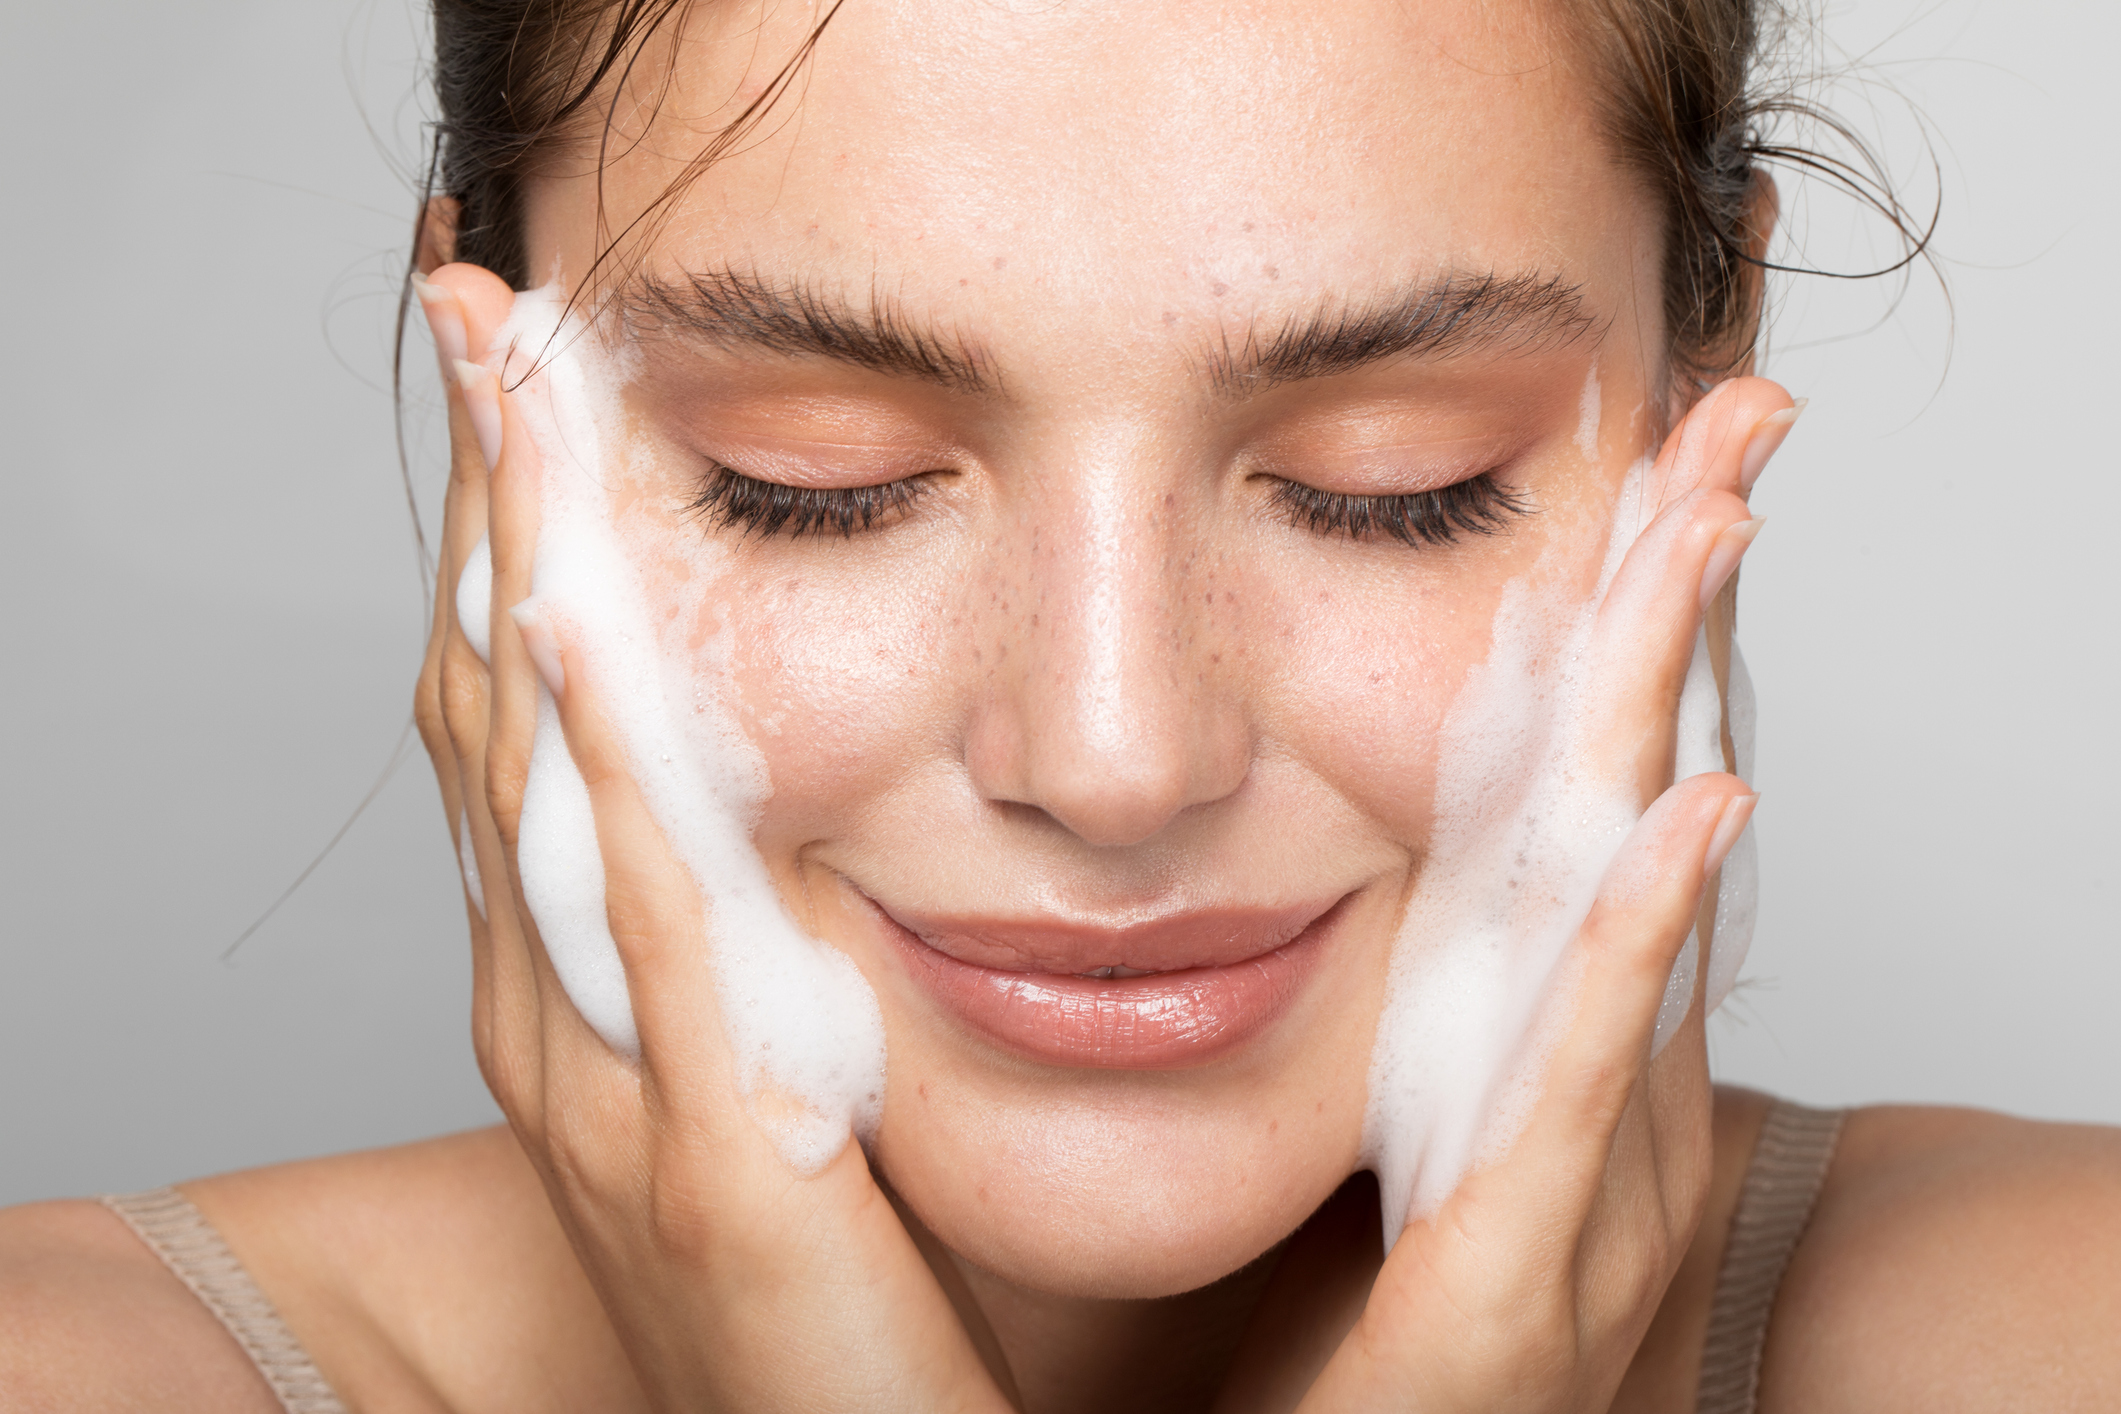 Keep your skin clean with medical grade skincare